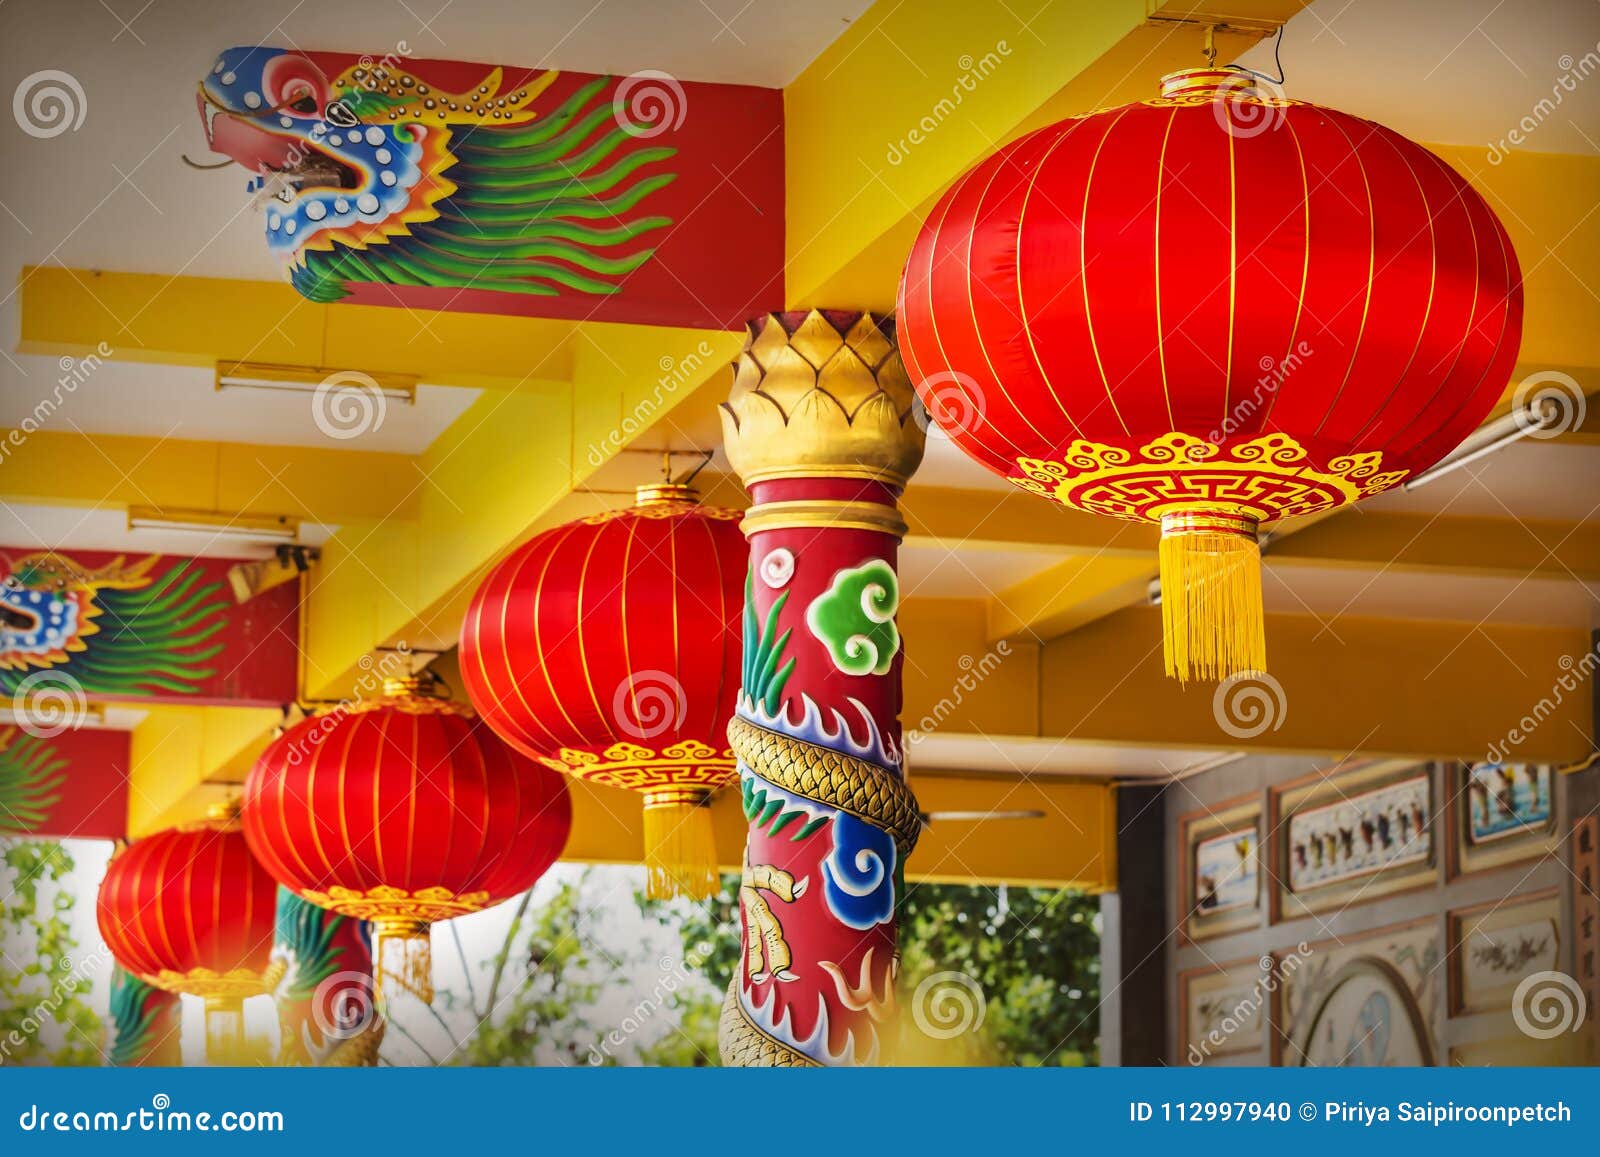 Chinese Red Paper Lanterns In Temple Hanging From The Ceiling